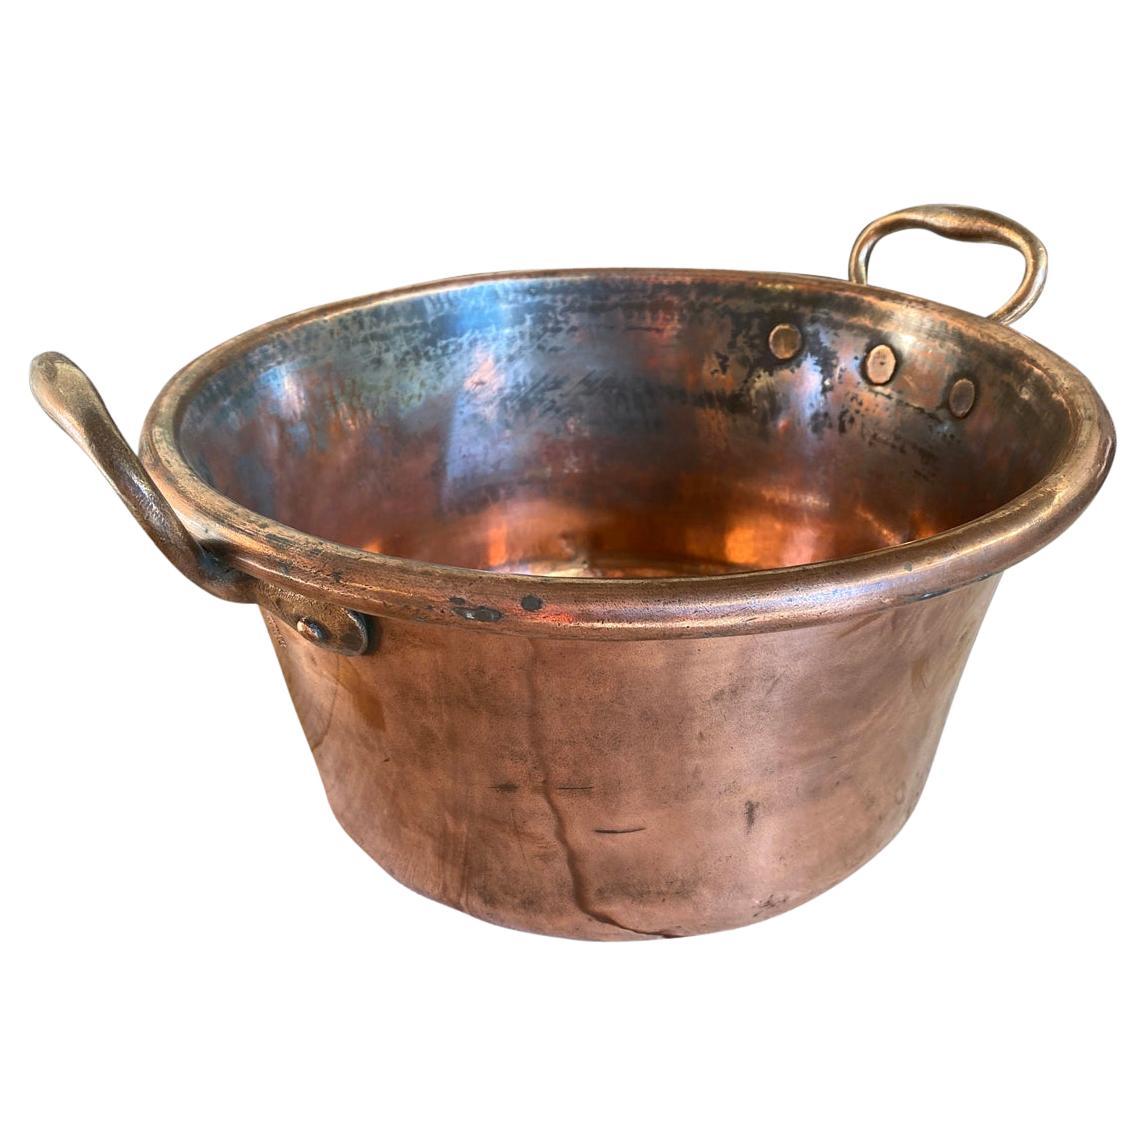 A charming 18th century copper pan with handles from the South of France. A perfect accent piece for any kitchen or living area.